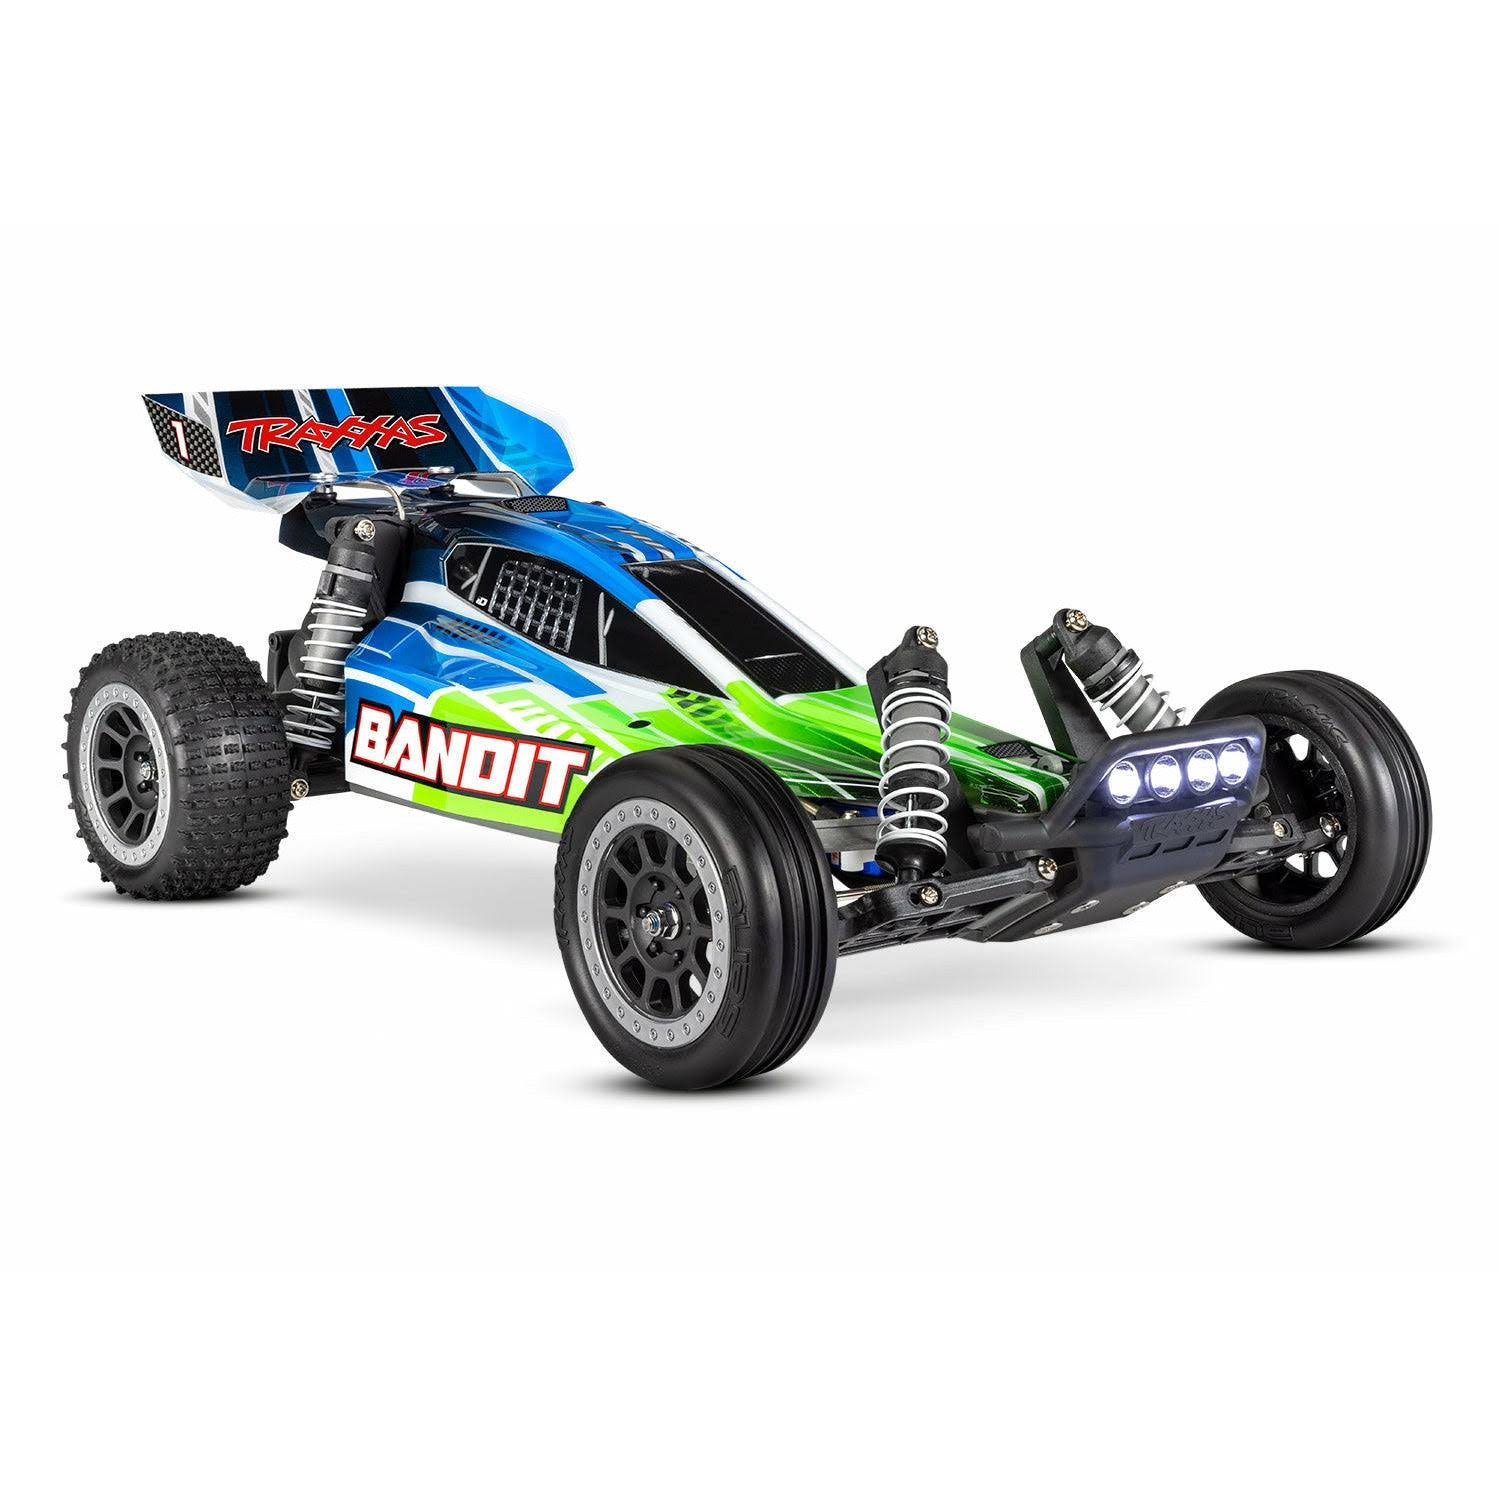 Traxxas Bandit Green 2wd 2,4 Ghz With Led Light + Battery And 12 Volt Charger